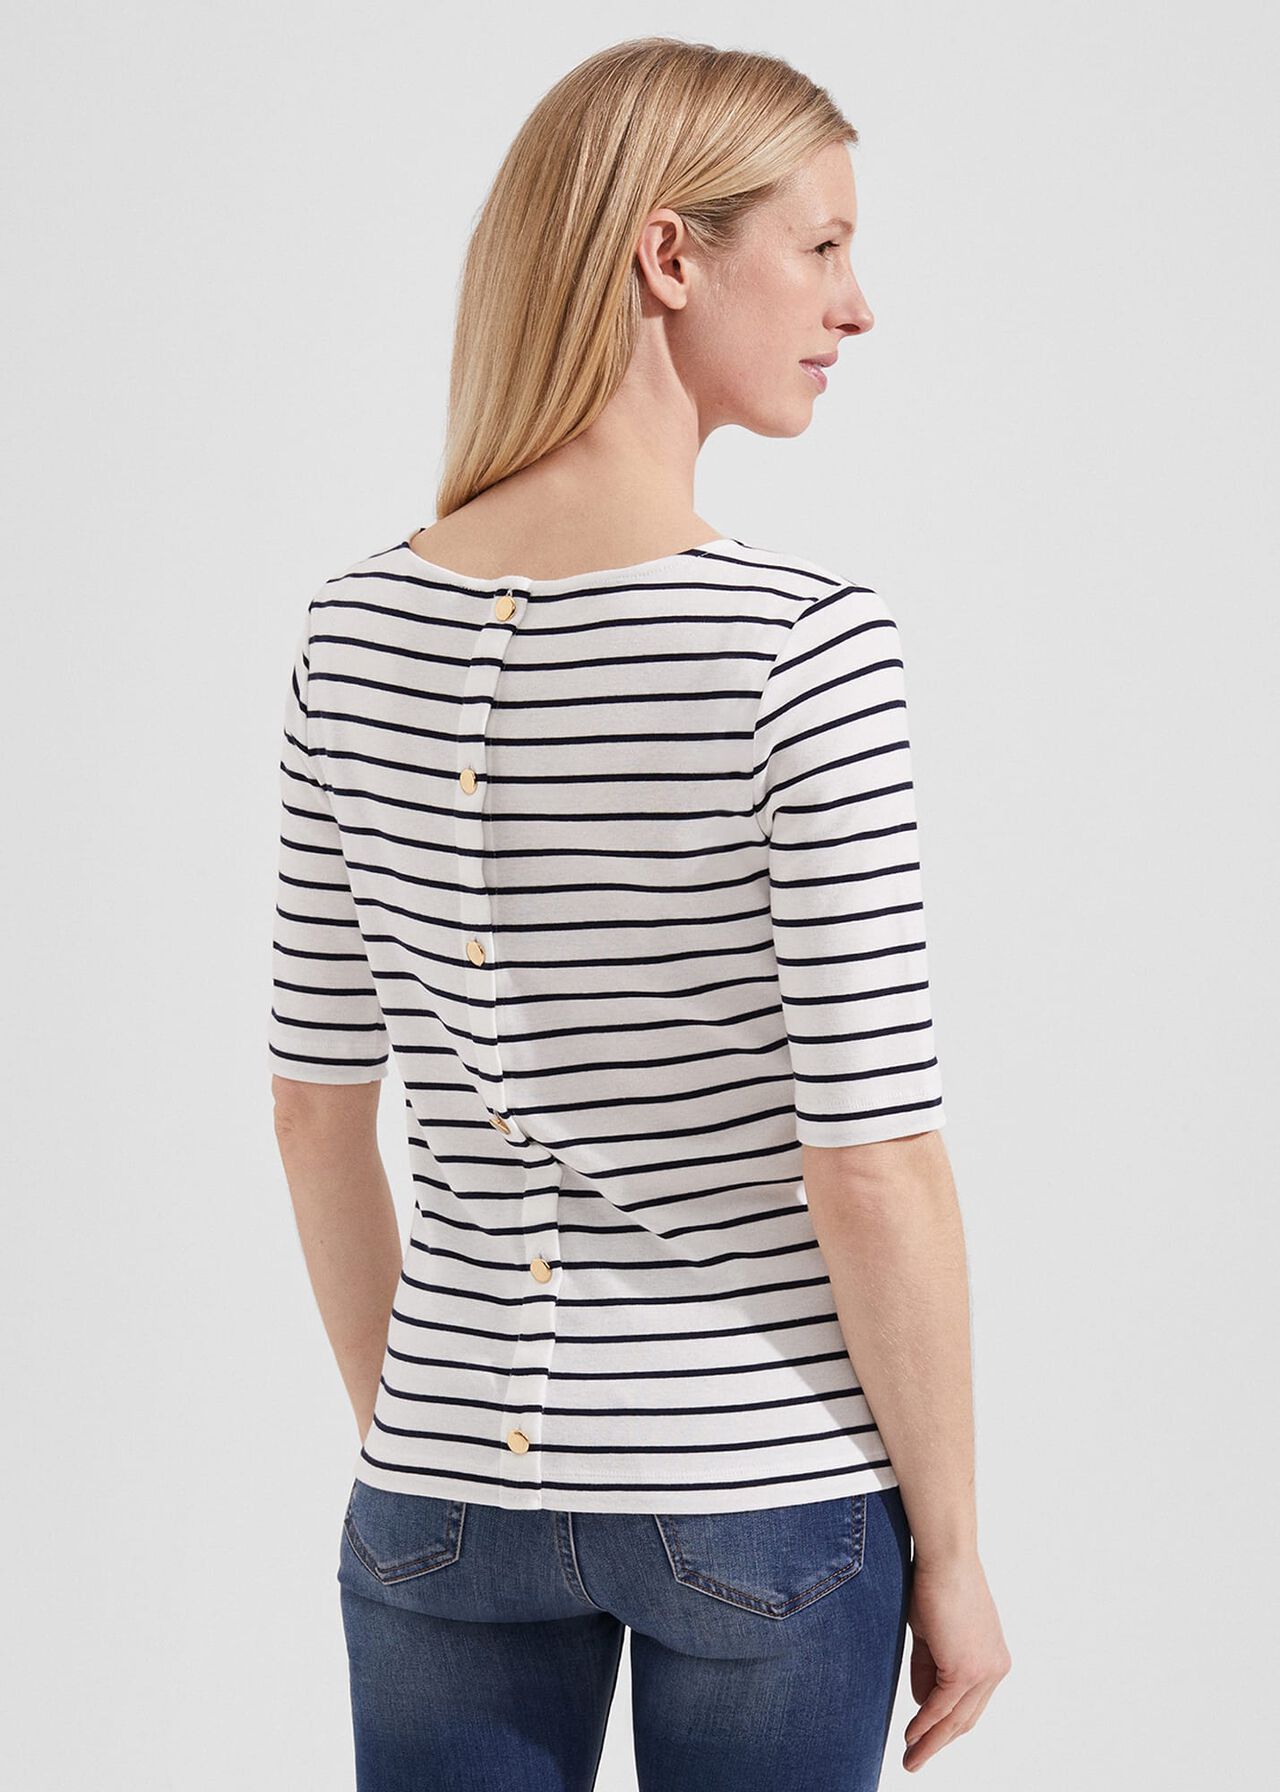 Katie Cotton Button Back Top, Ivory Hobbsnavy, hi-res